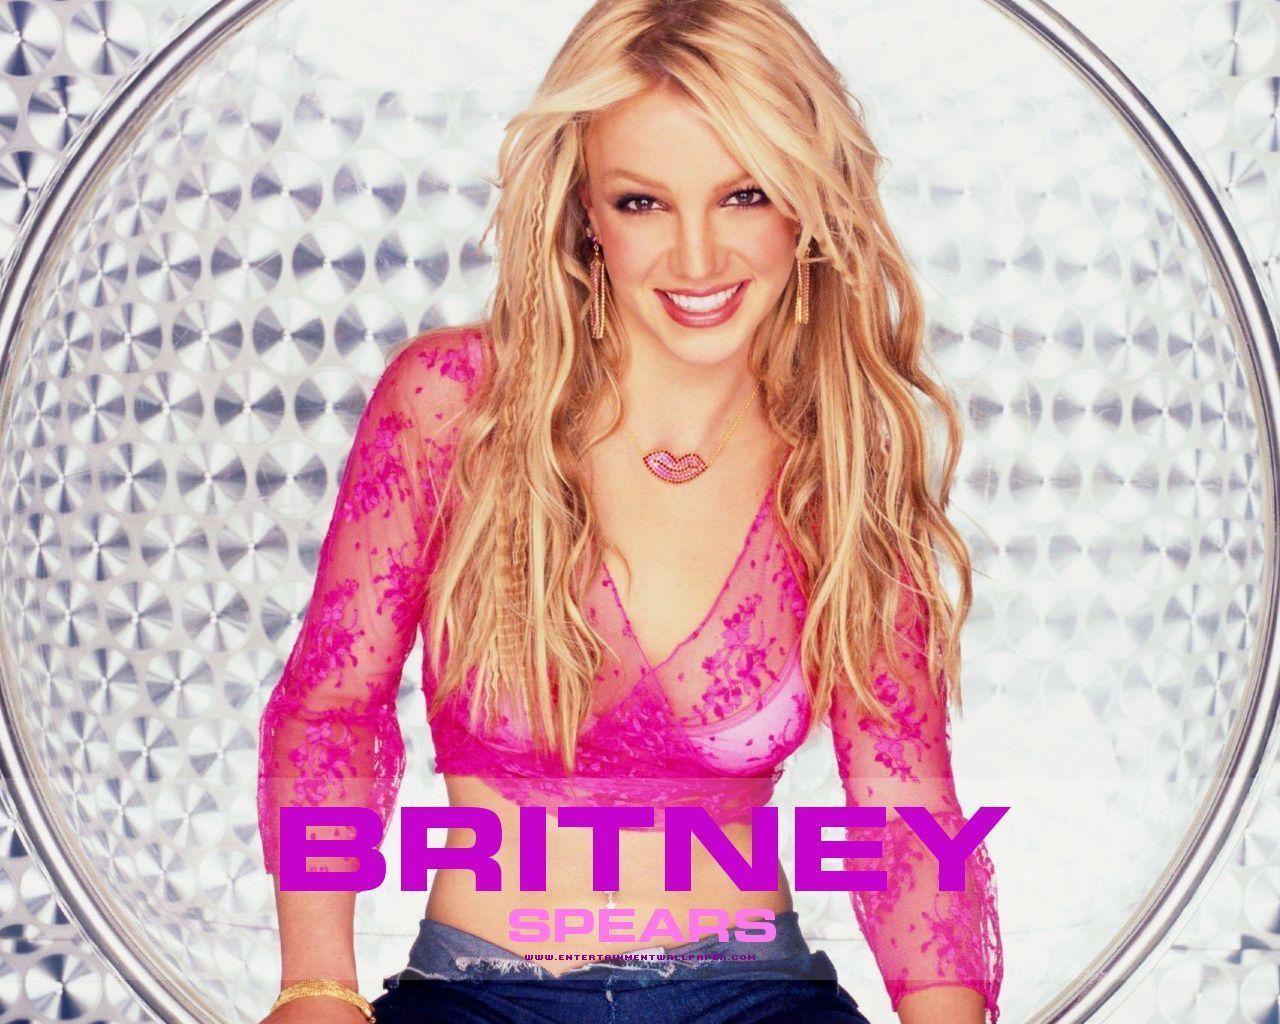 Britney Spears Wallpapers for PC Desktop Full HD Pictures